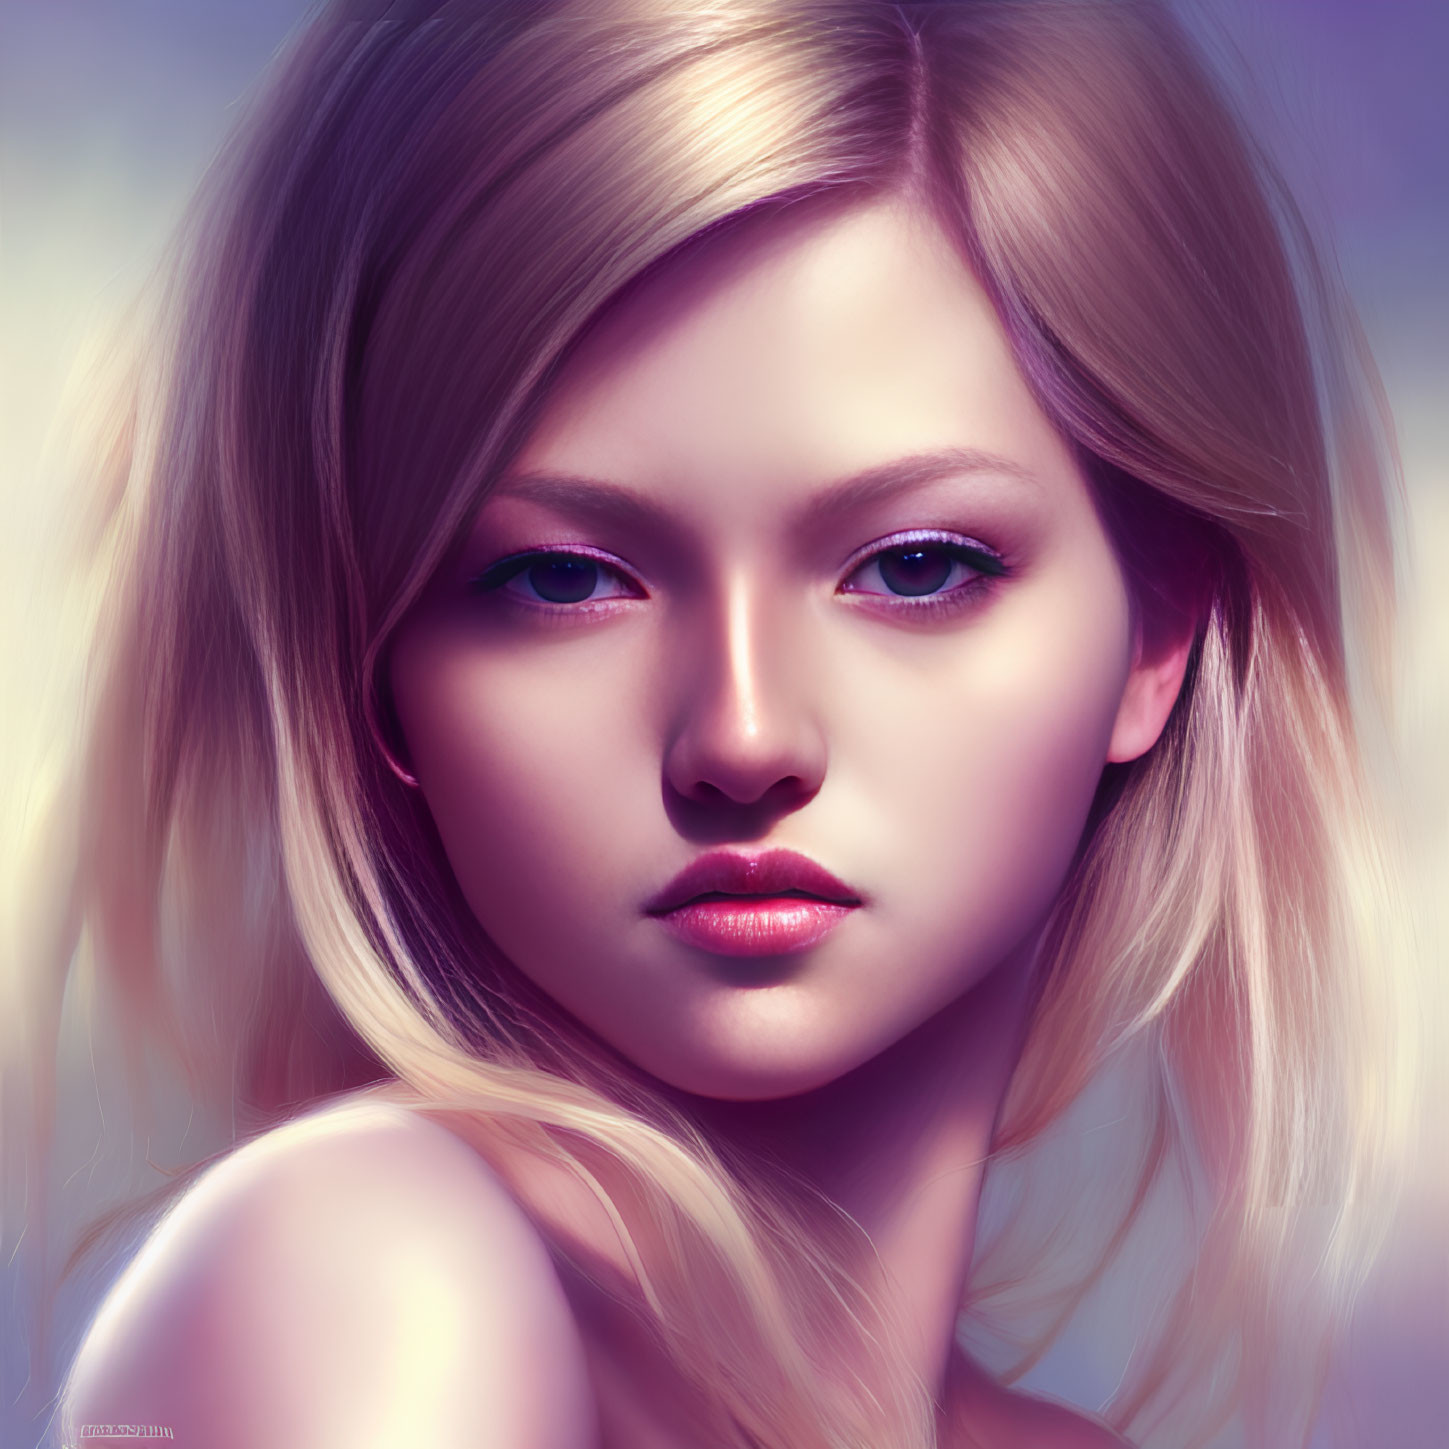 Blond-Haired Woman with Purple Eyes in Digital Art